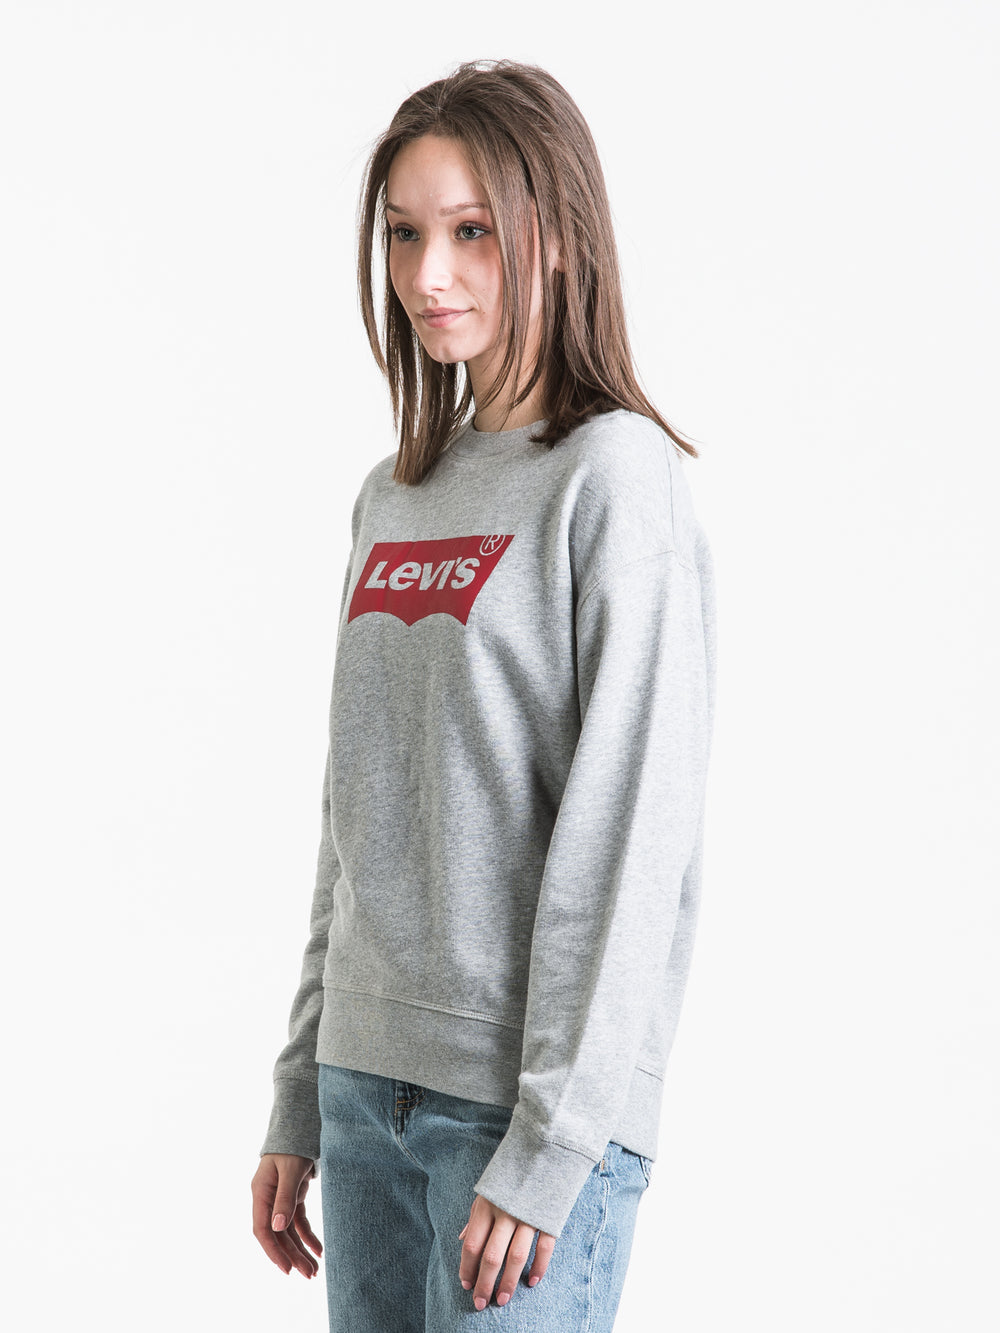 LEVIS GRAPHIC STANDARD CREWNECK SWEATER - CLEARANCE